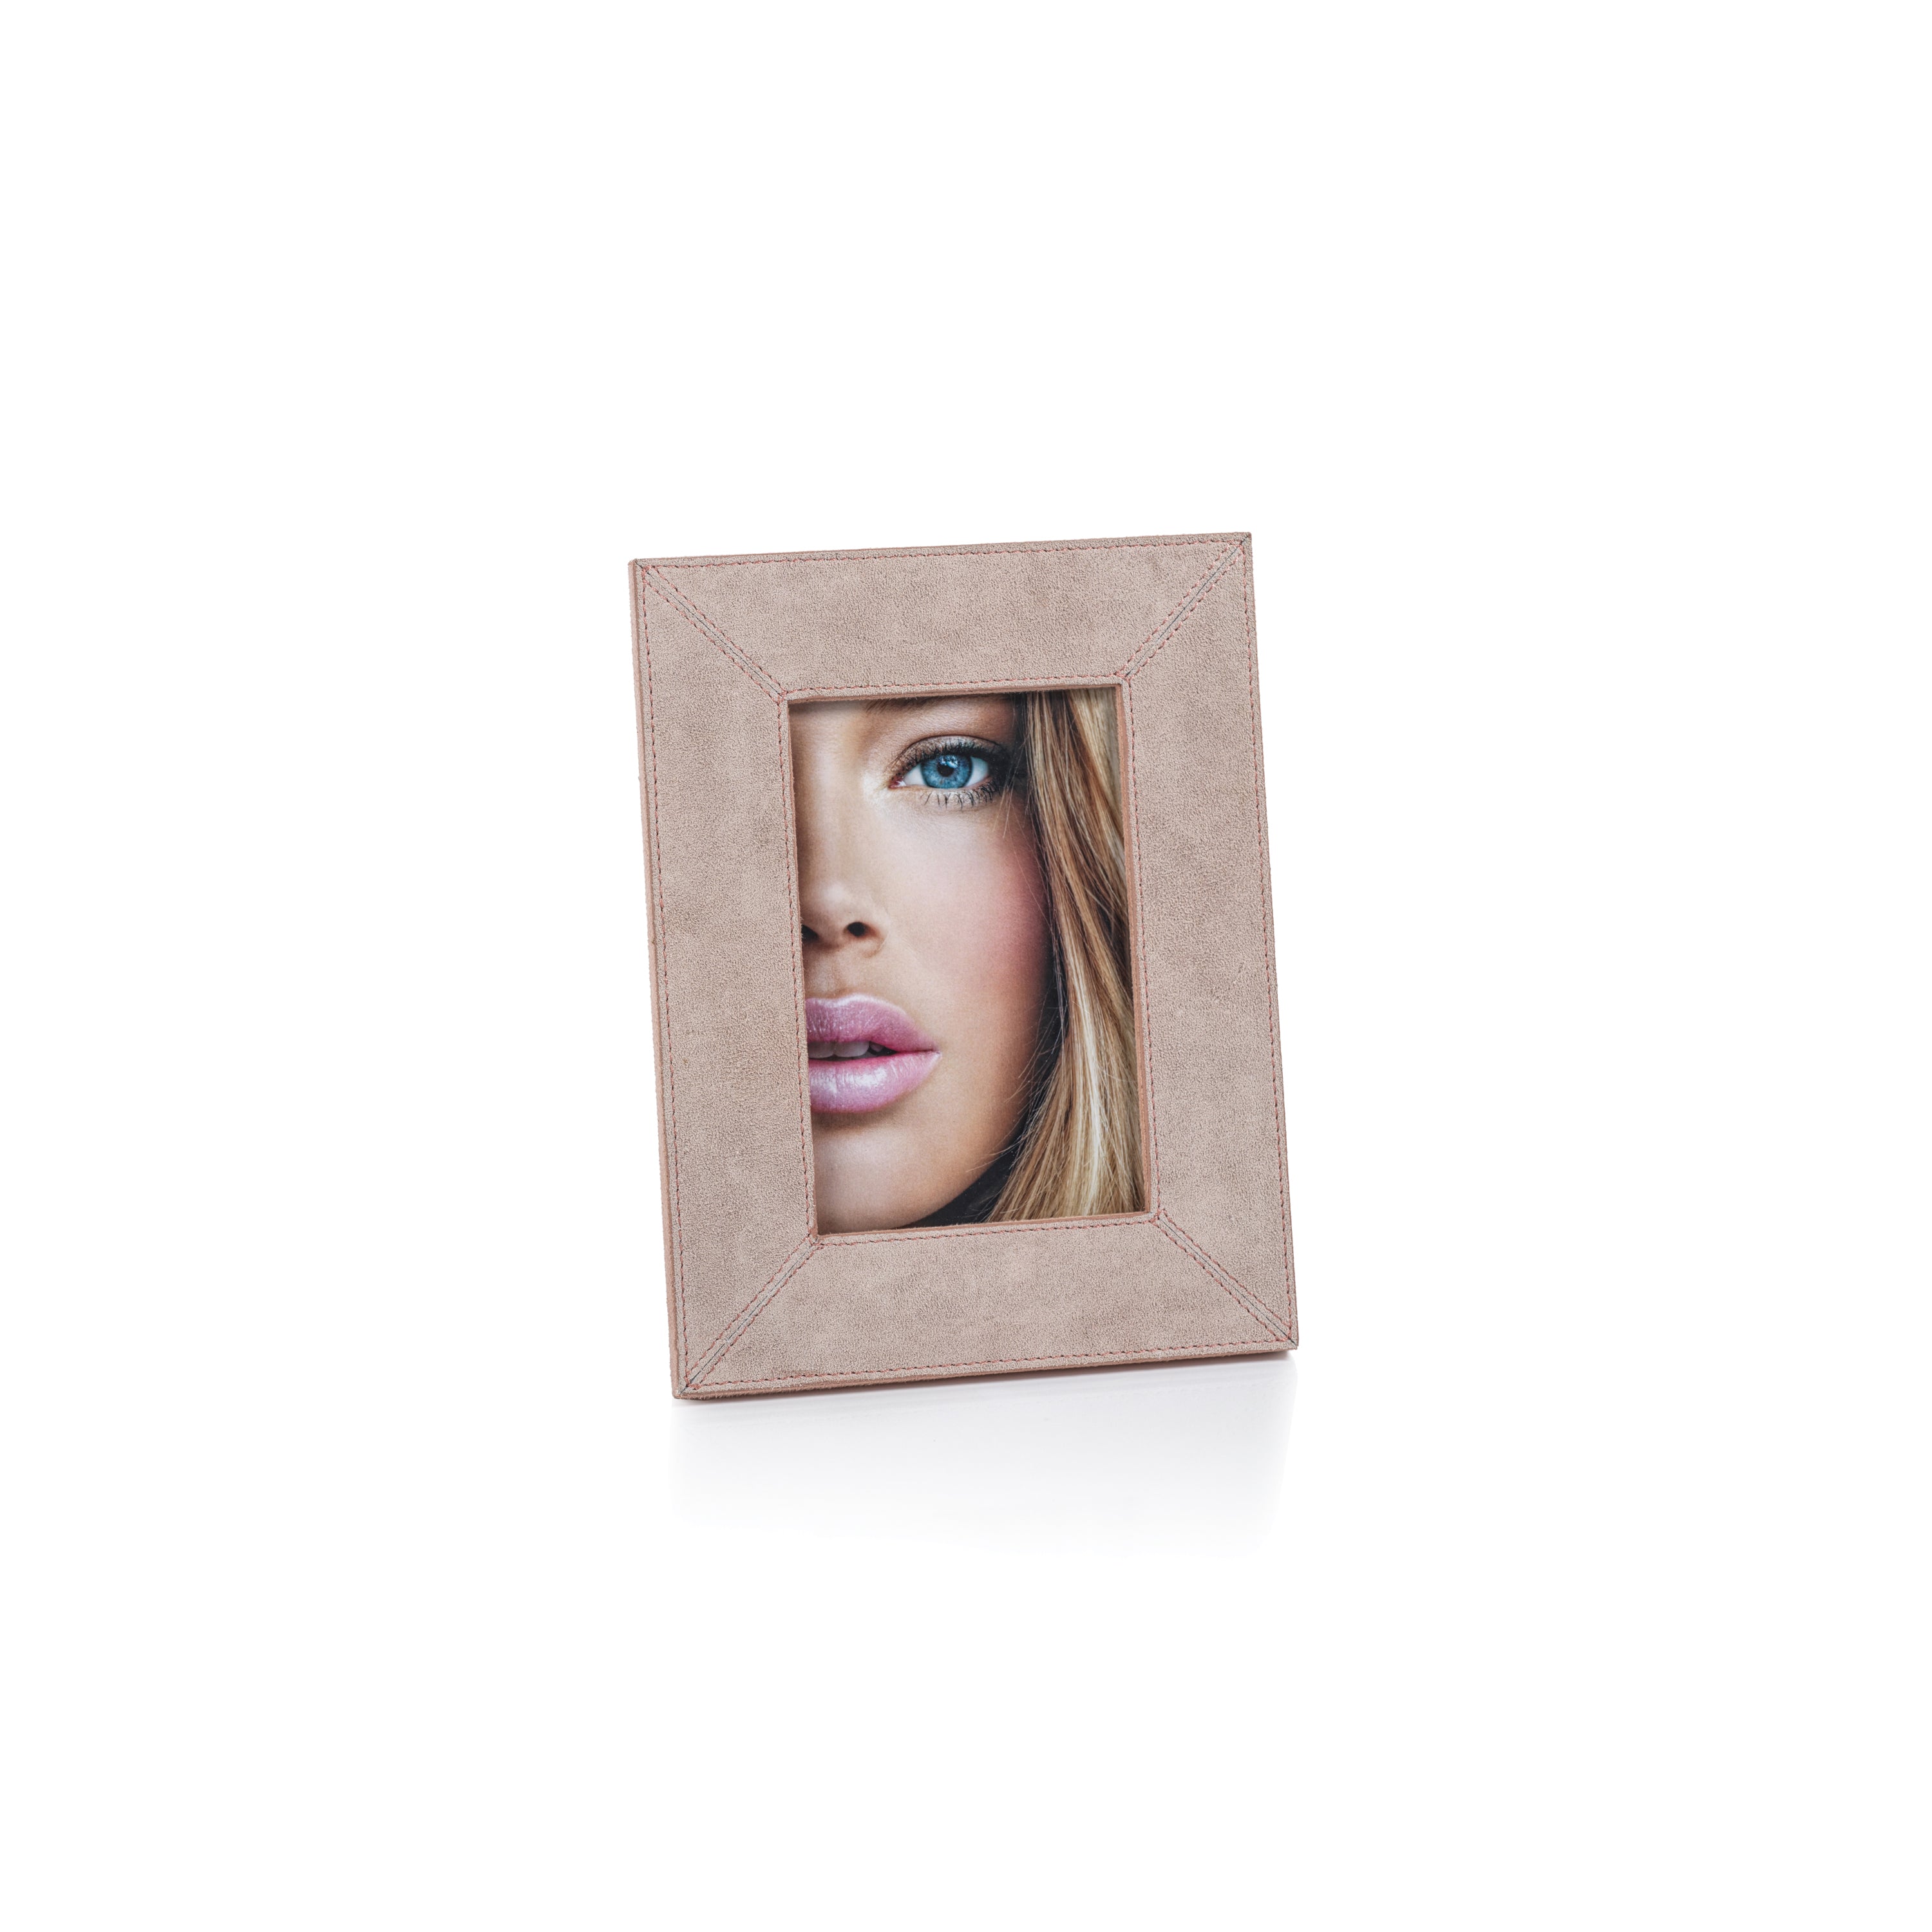 Zodax Picture Frames Suede Lux Photo Frame 4" x 6" -Amalfi Blush